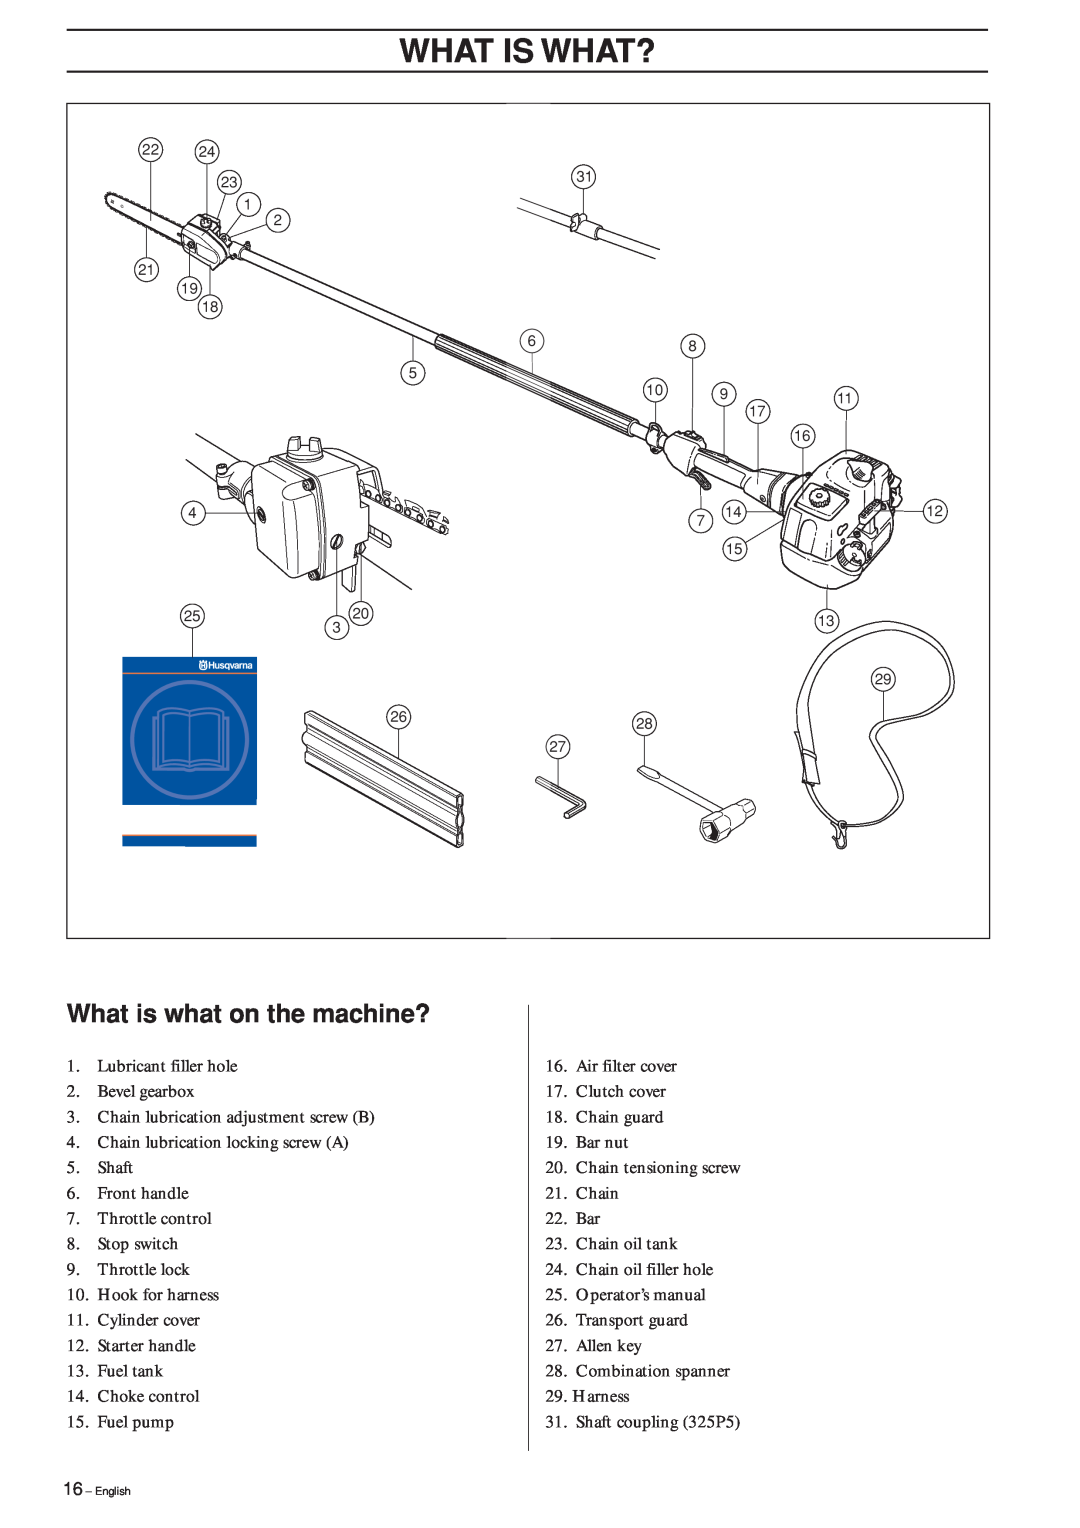 Husqvarna 323P4, 325P4, 325P5 manual What Is What?, What is what on the machine? 